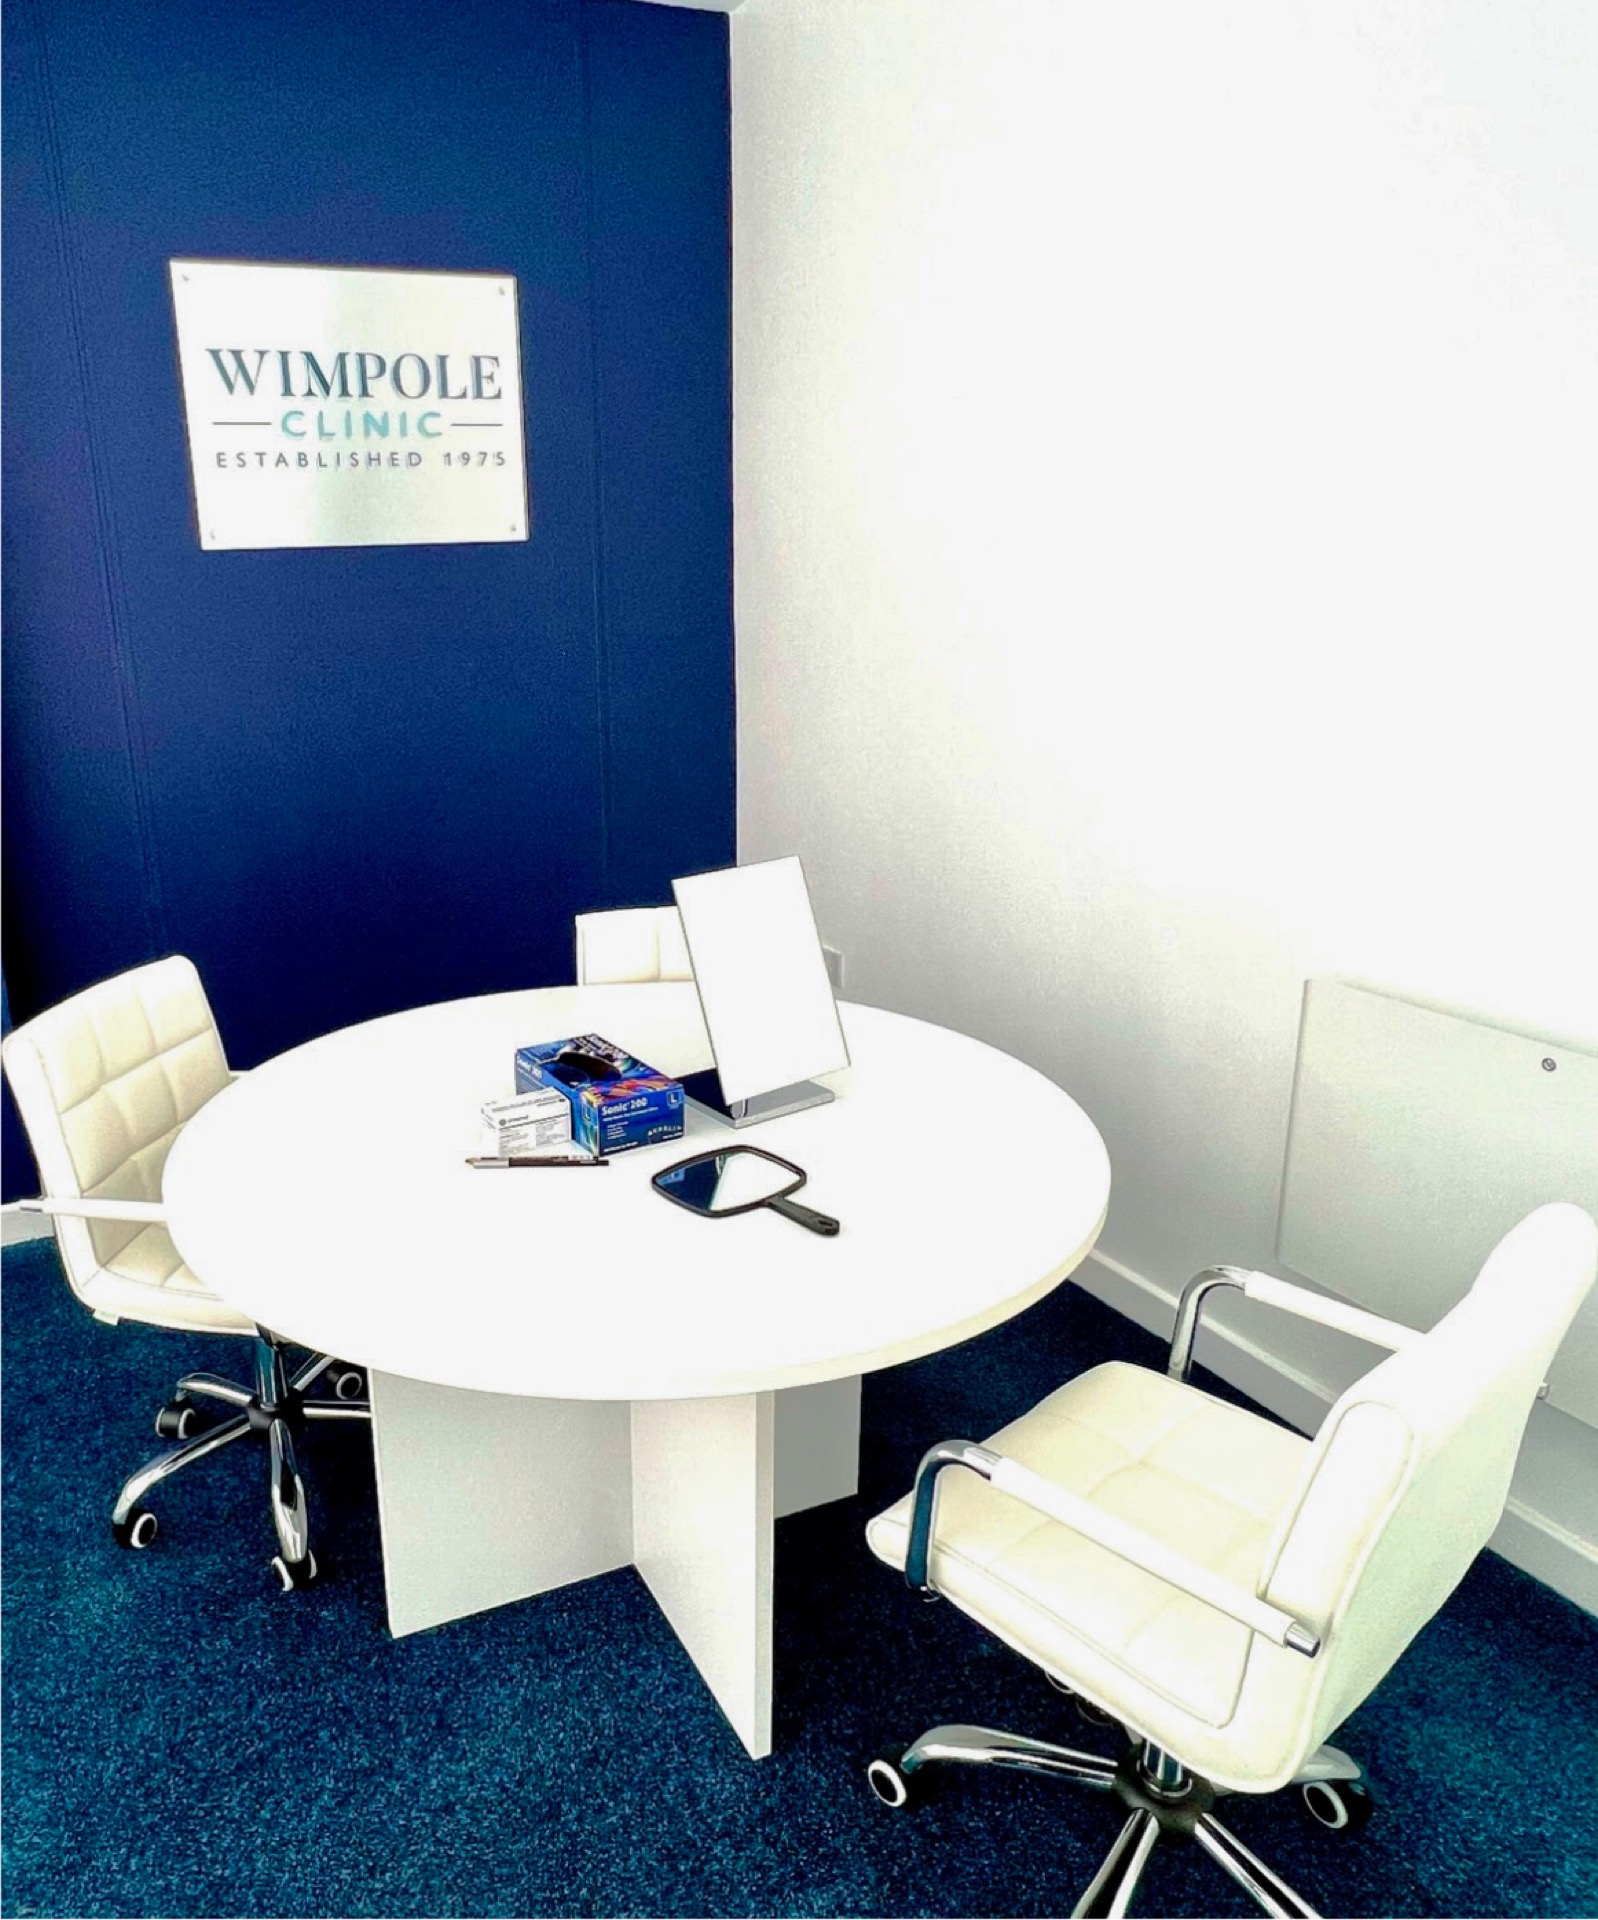 Leicester Hair Transplant Clinic, Wimpole Clinic